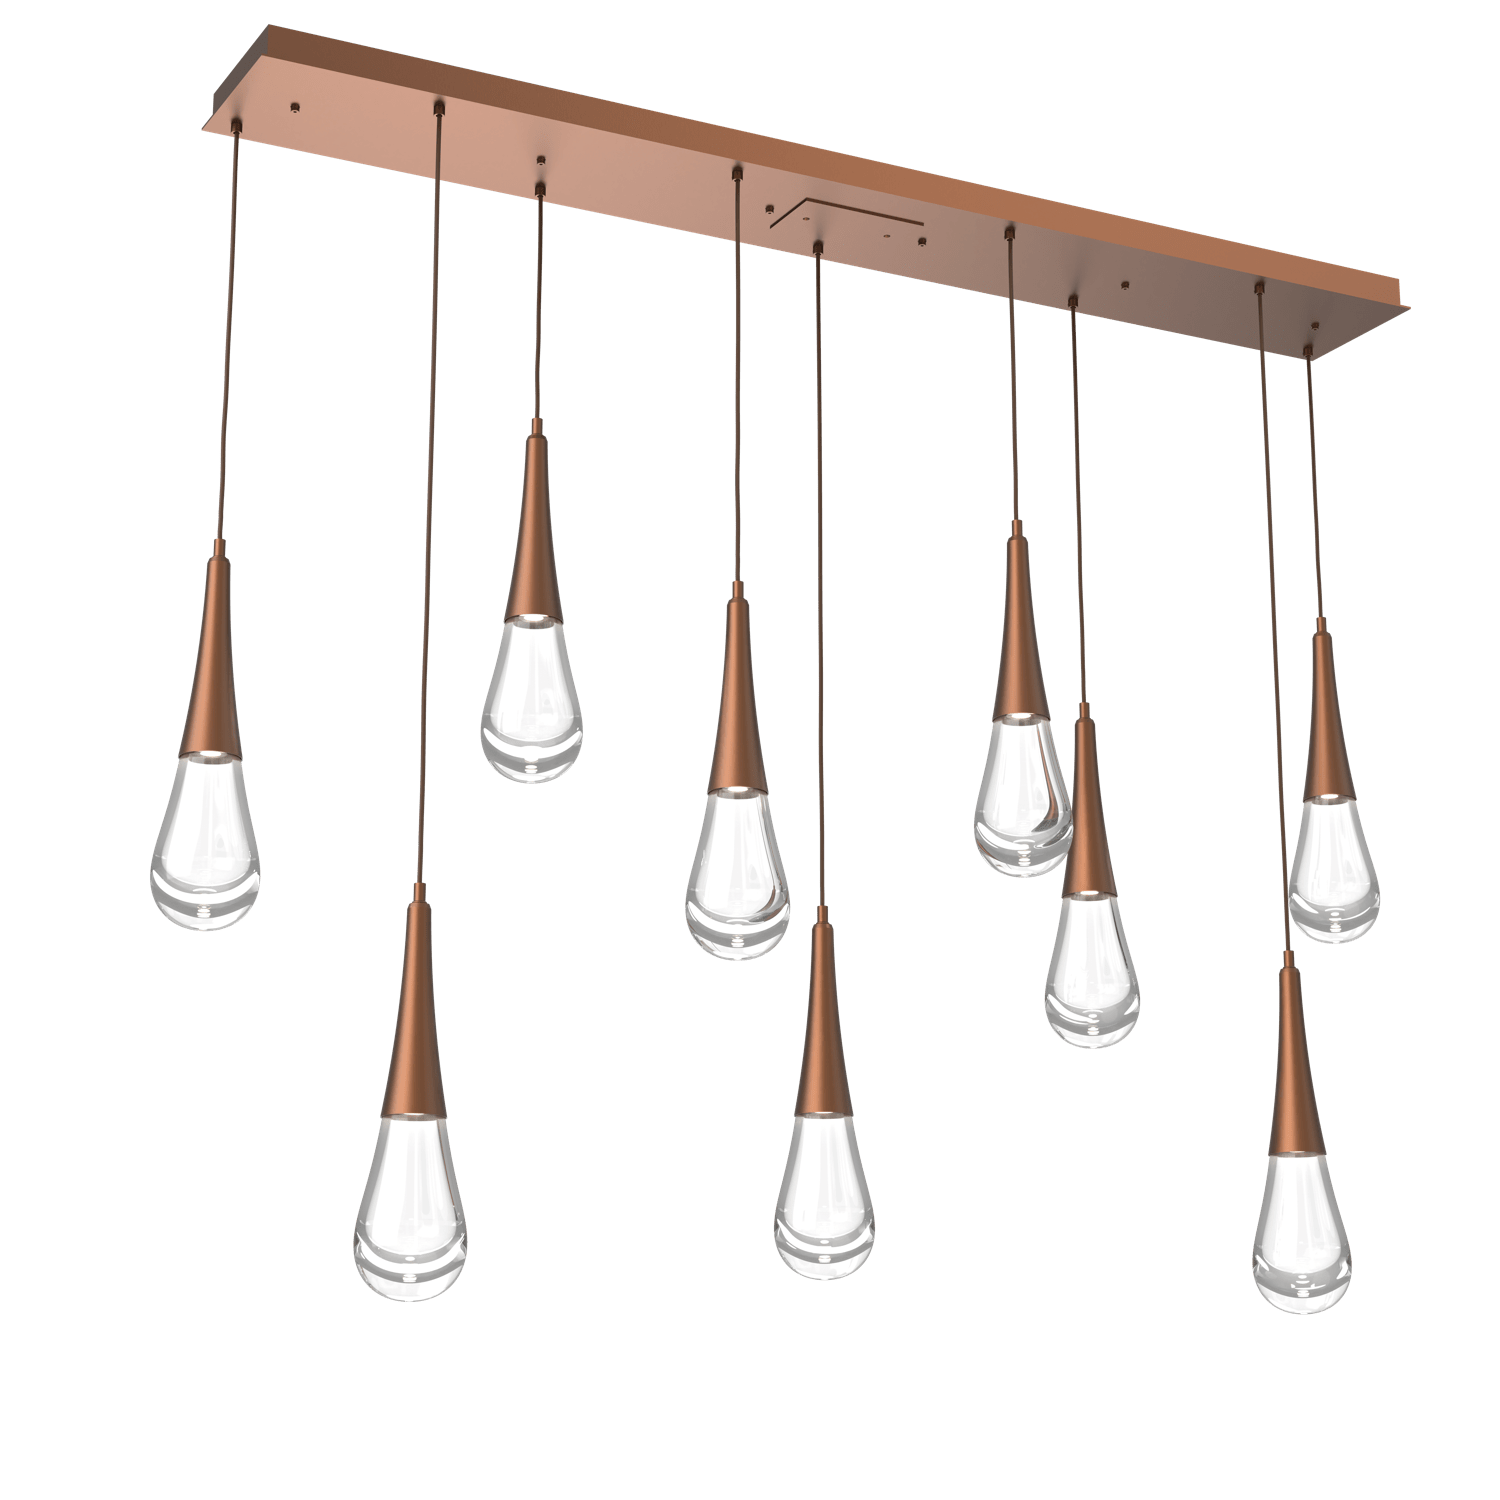 PLB0078-09-BB-Hammerton-Studio-Raindrop-9-light-linear-pendant-chandelier-with-burnished-bronze-finish-and-clear-blown-glass-shades-and-LED-lamping